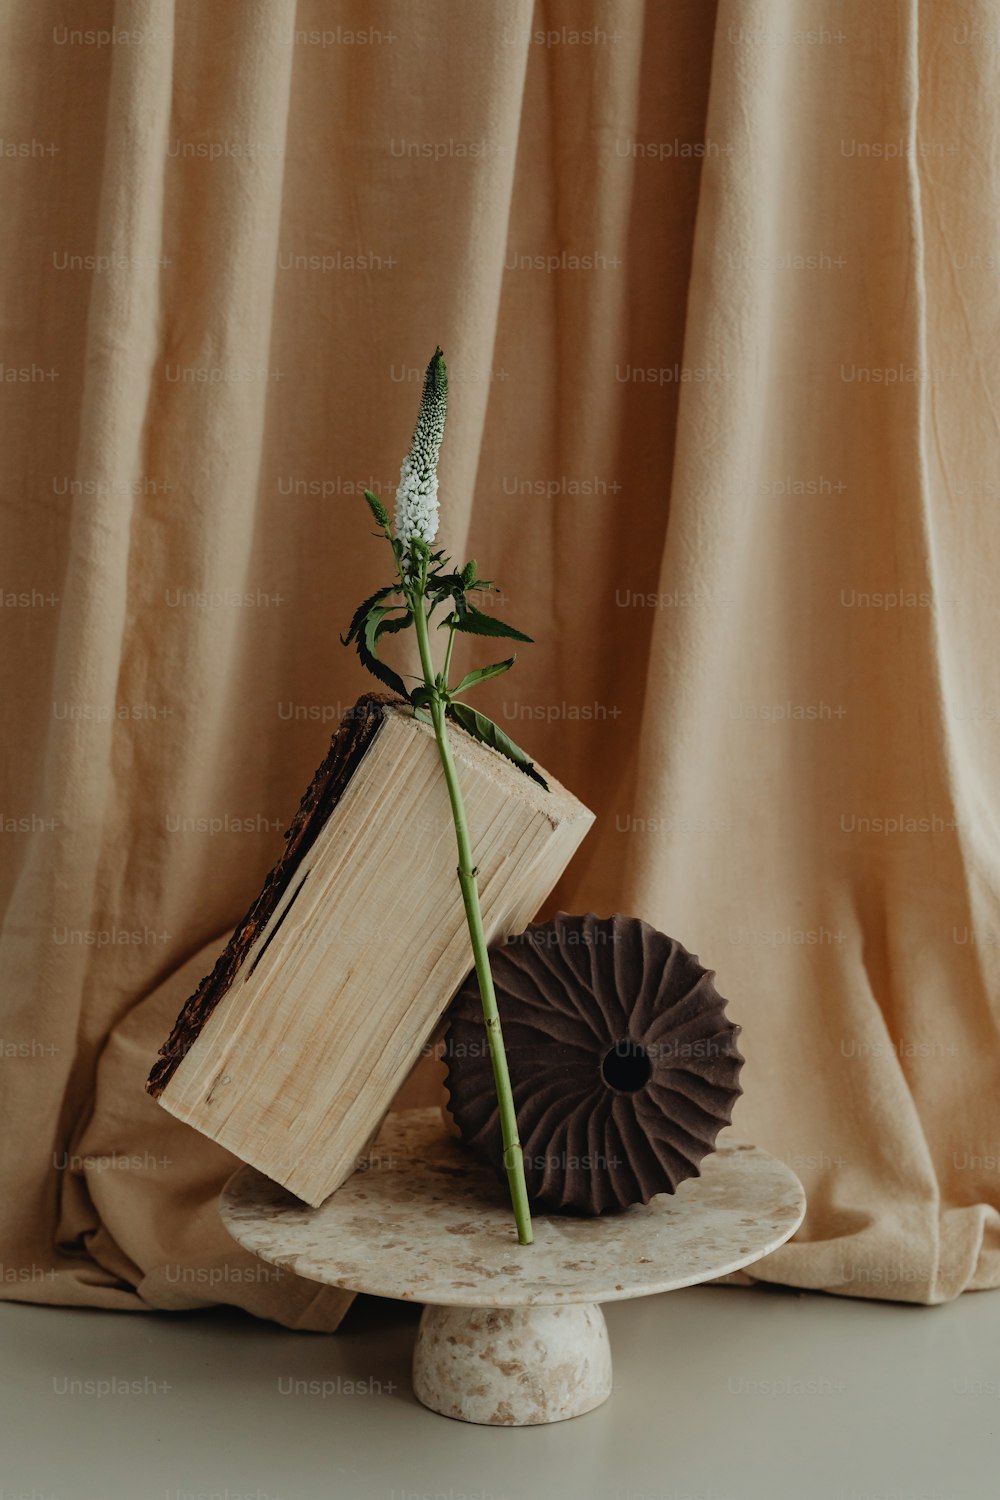 a flower that is sitting on top of a book